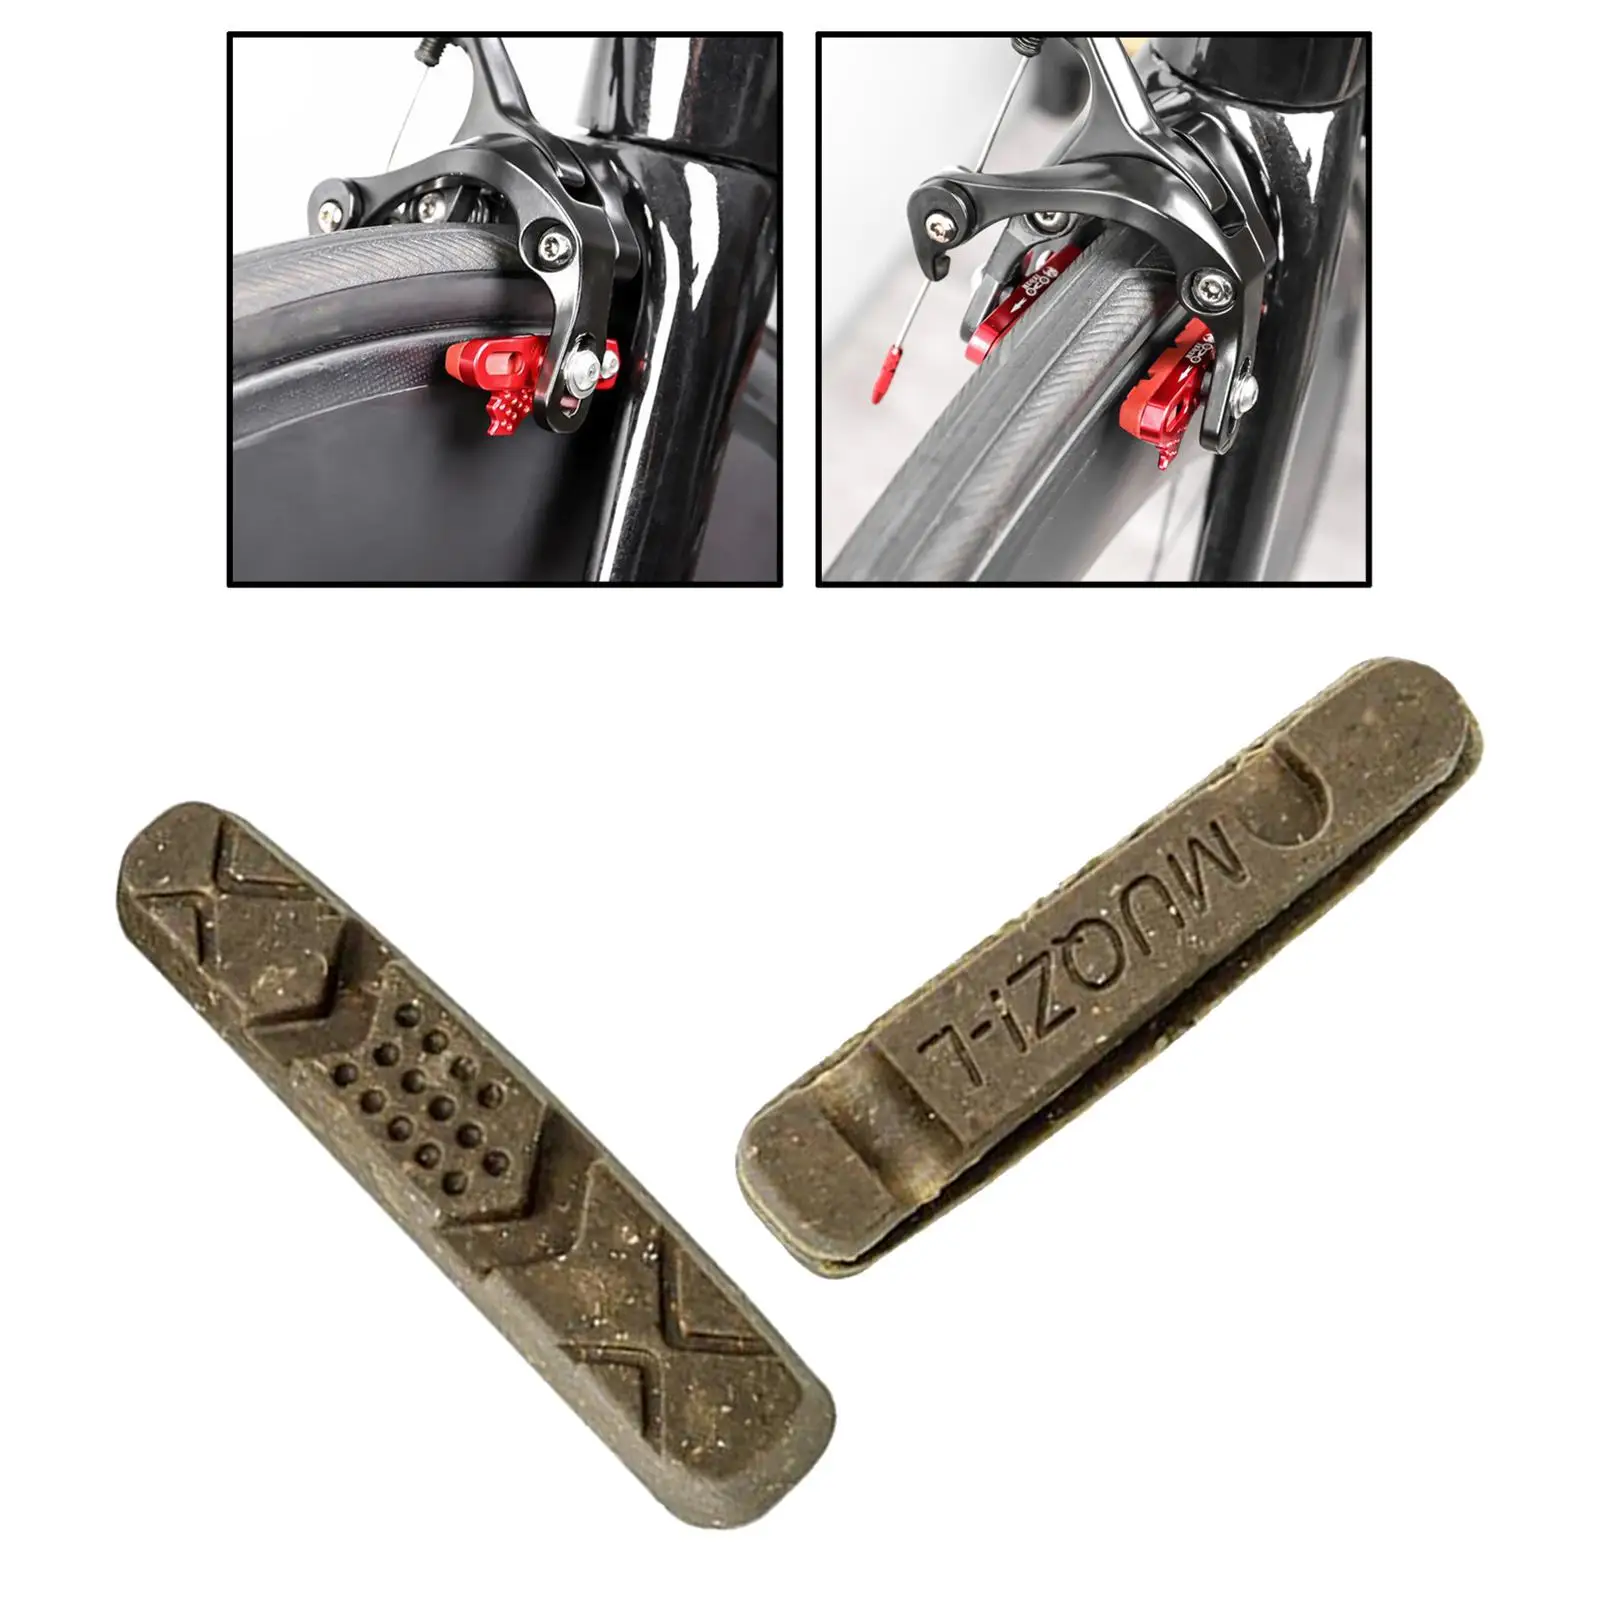 Bike Brake Pads, 1 Pairs Road Mountain Bicycle V-Brake Blocks Shoes, No Noise No Skid, for Front and Back Wheel